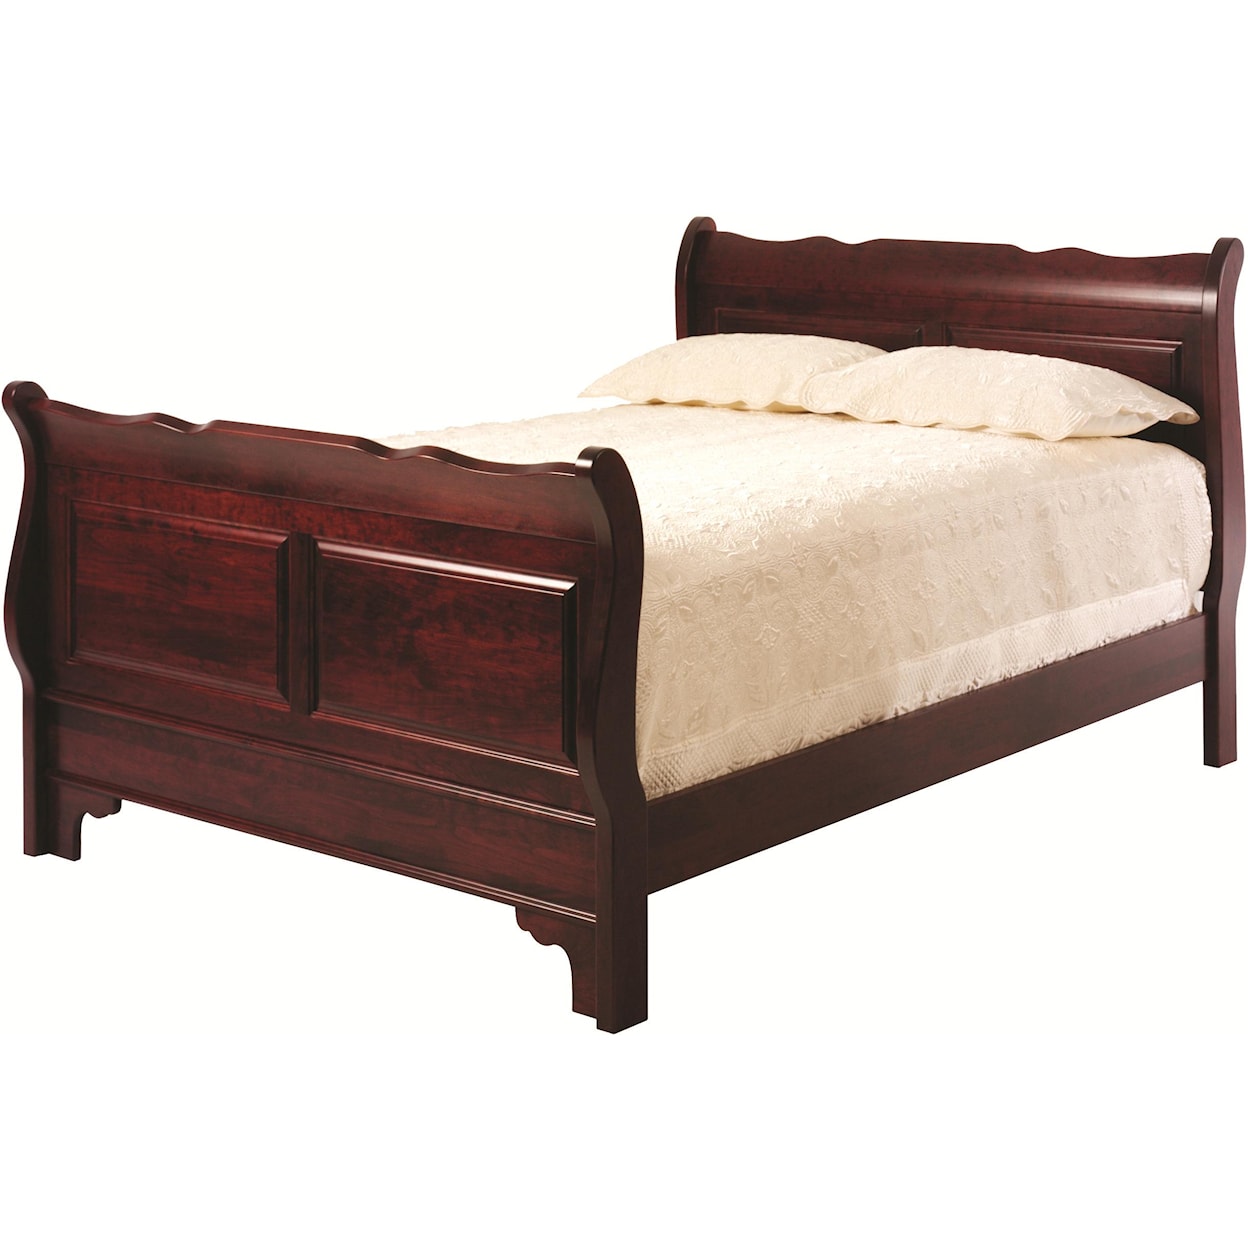 Millcraft Victoria's Tradition Queen Sleigh Bed